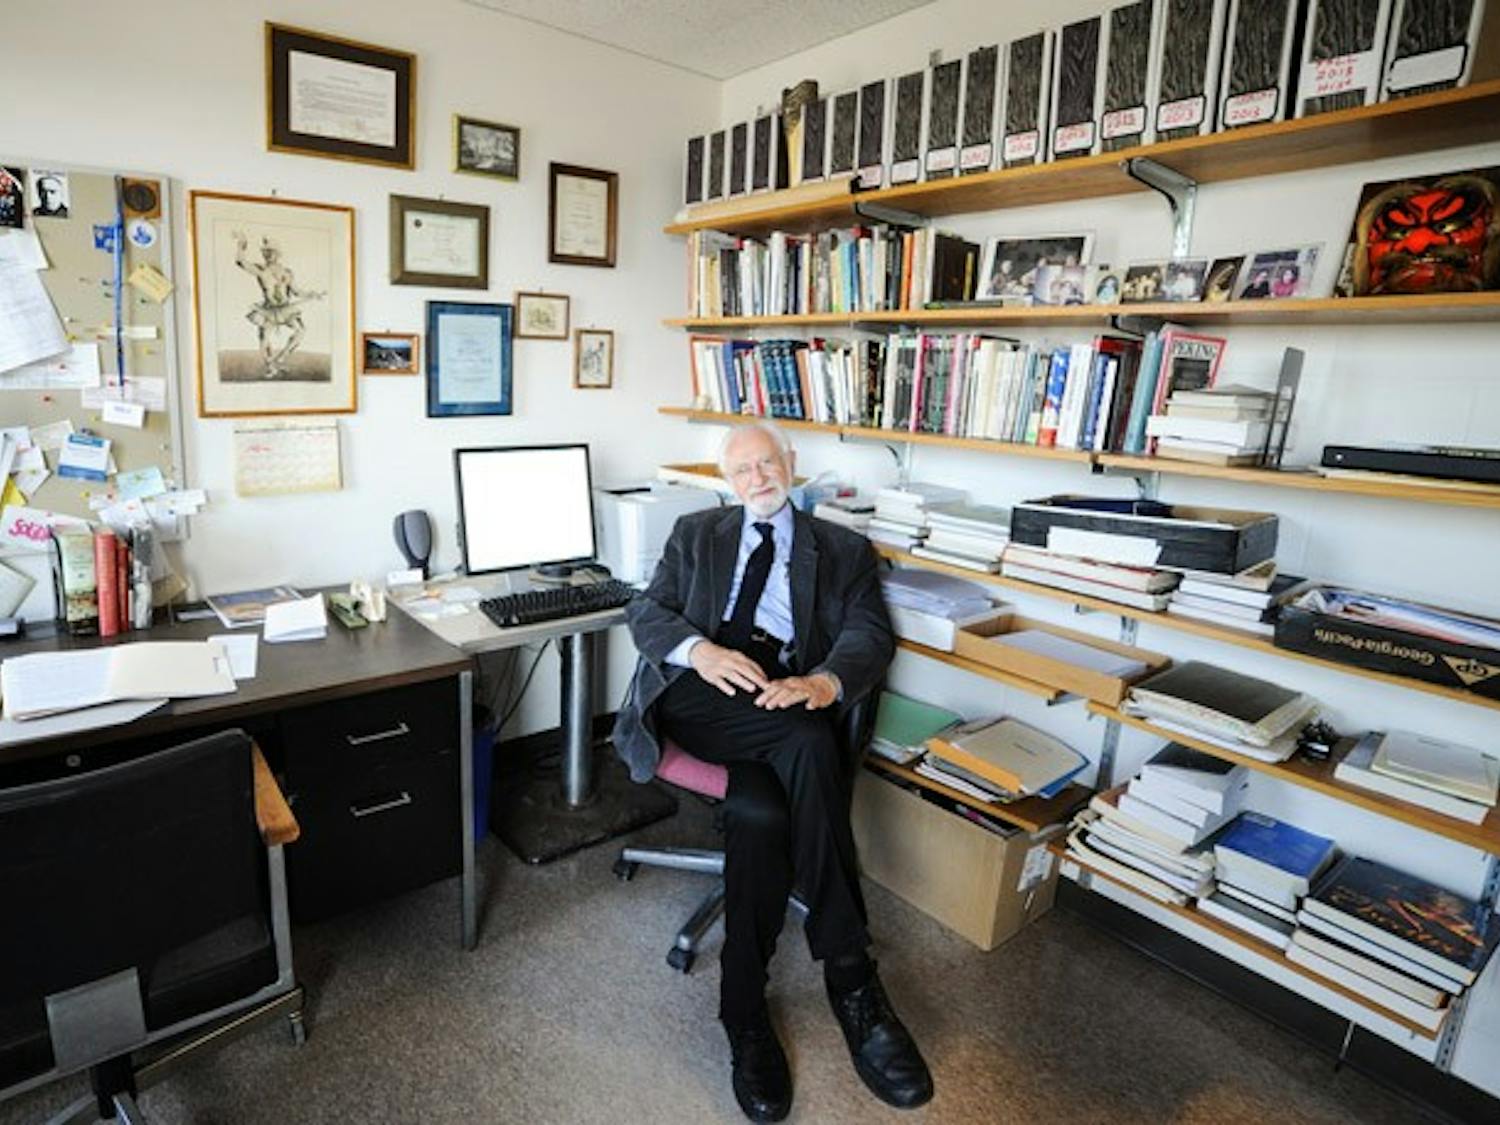 Dr. Kazimierz Braun has directed 150 plays around the world; the walls of his office are adorned with the books he published on theater and posters of his productions.&nbsp;